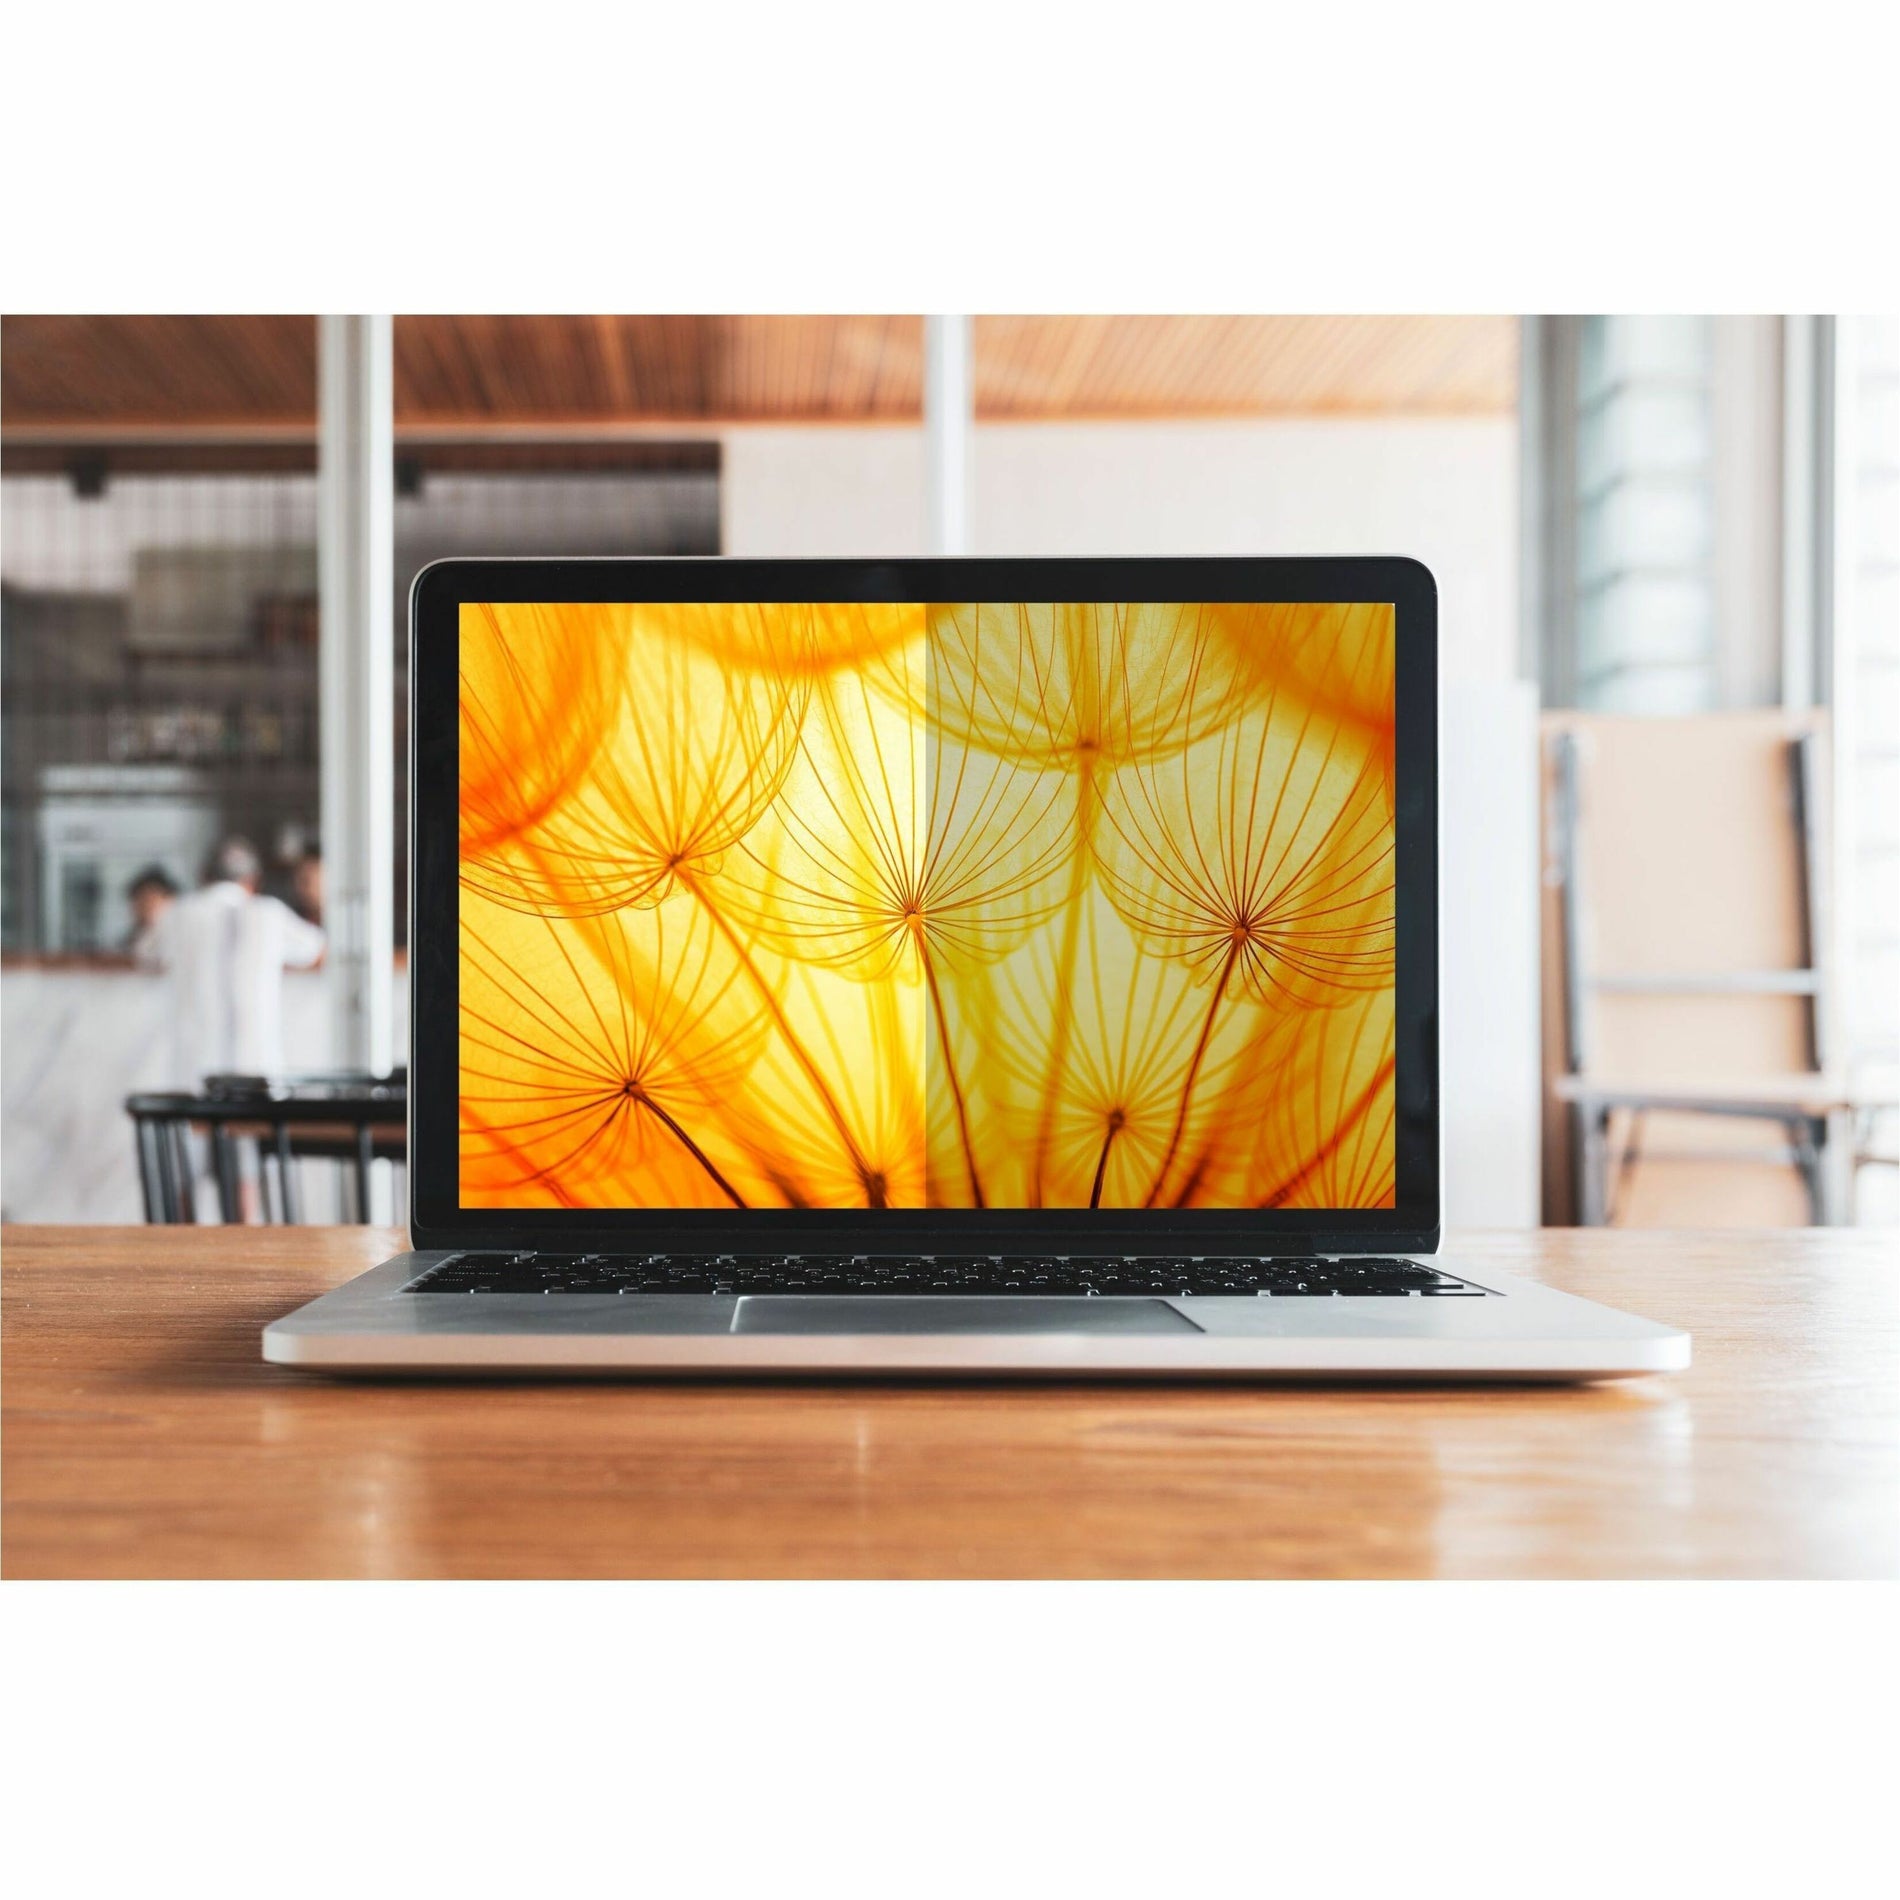 3M BP141W1B Bright Screen Privacy Filter for 14.1in Laptop, 16:10, Easy Application, Blue Light Reduction